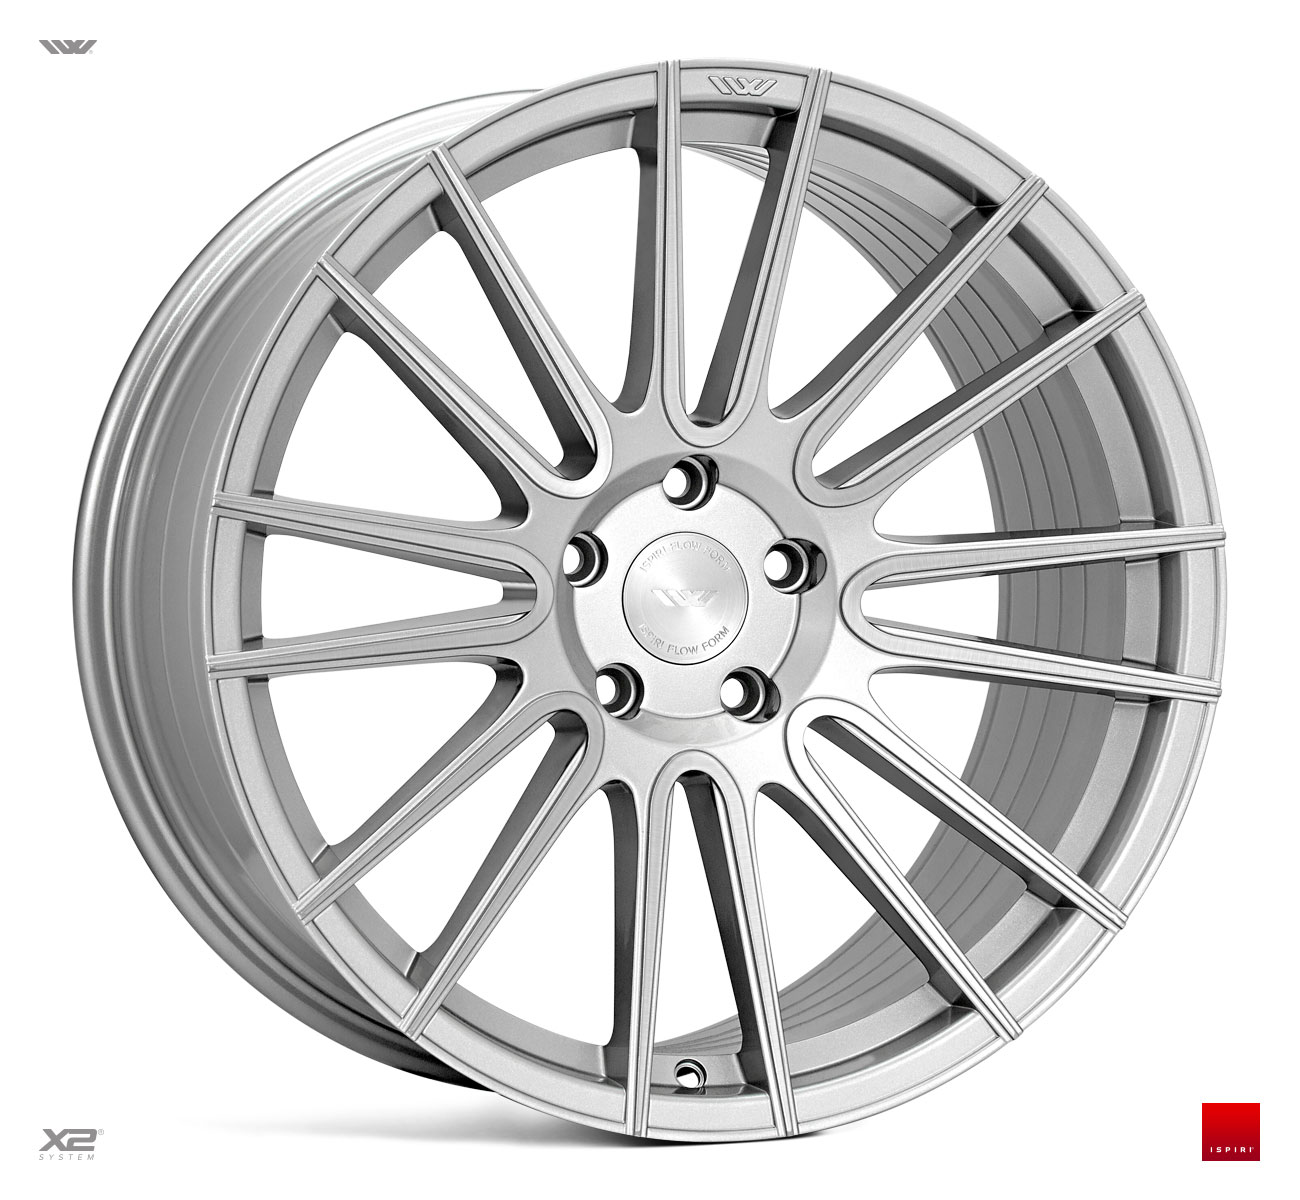 NEW 20" ISPIRI FFR8 8-TWIN CURVED SPOKE ALLOY WHEELS IN PURE SILVER BRUSHED, WIDER 10" REAR